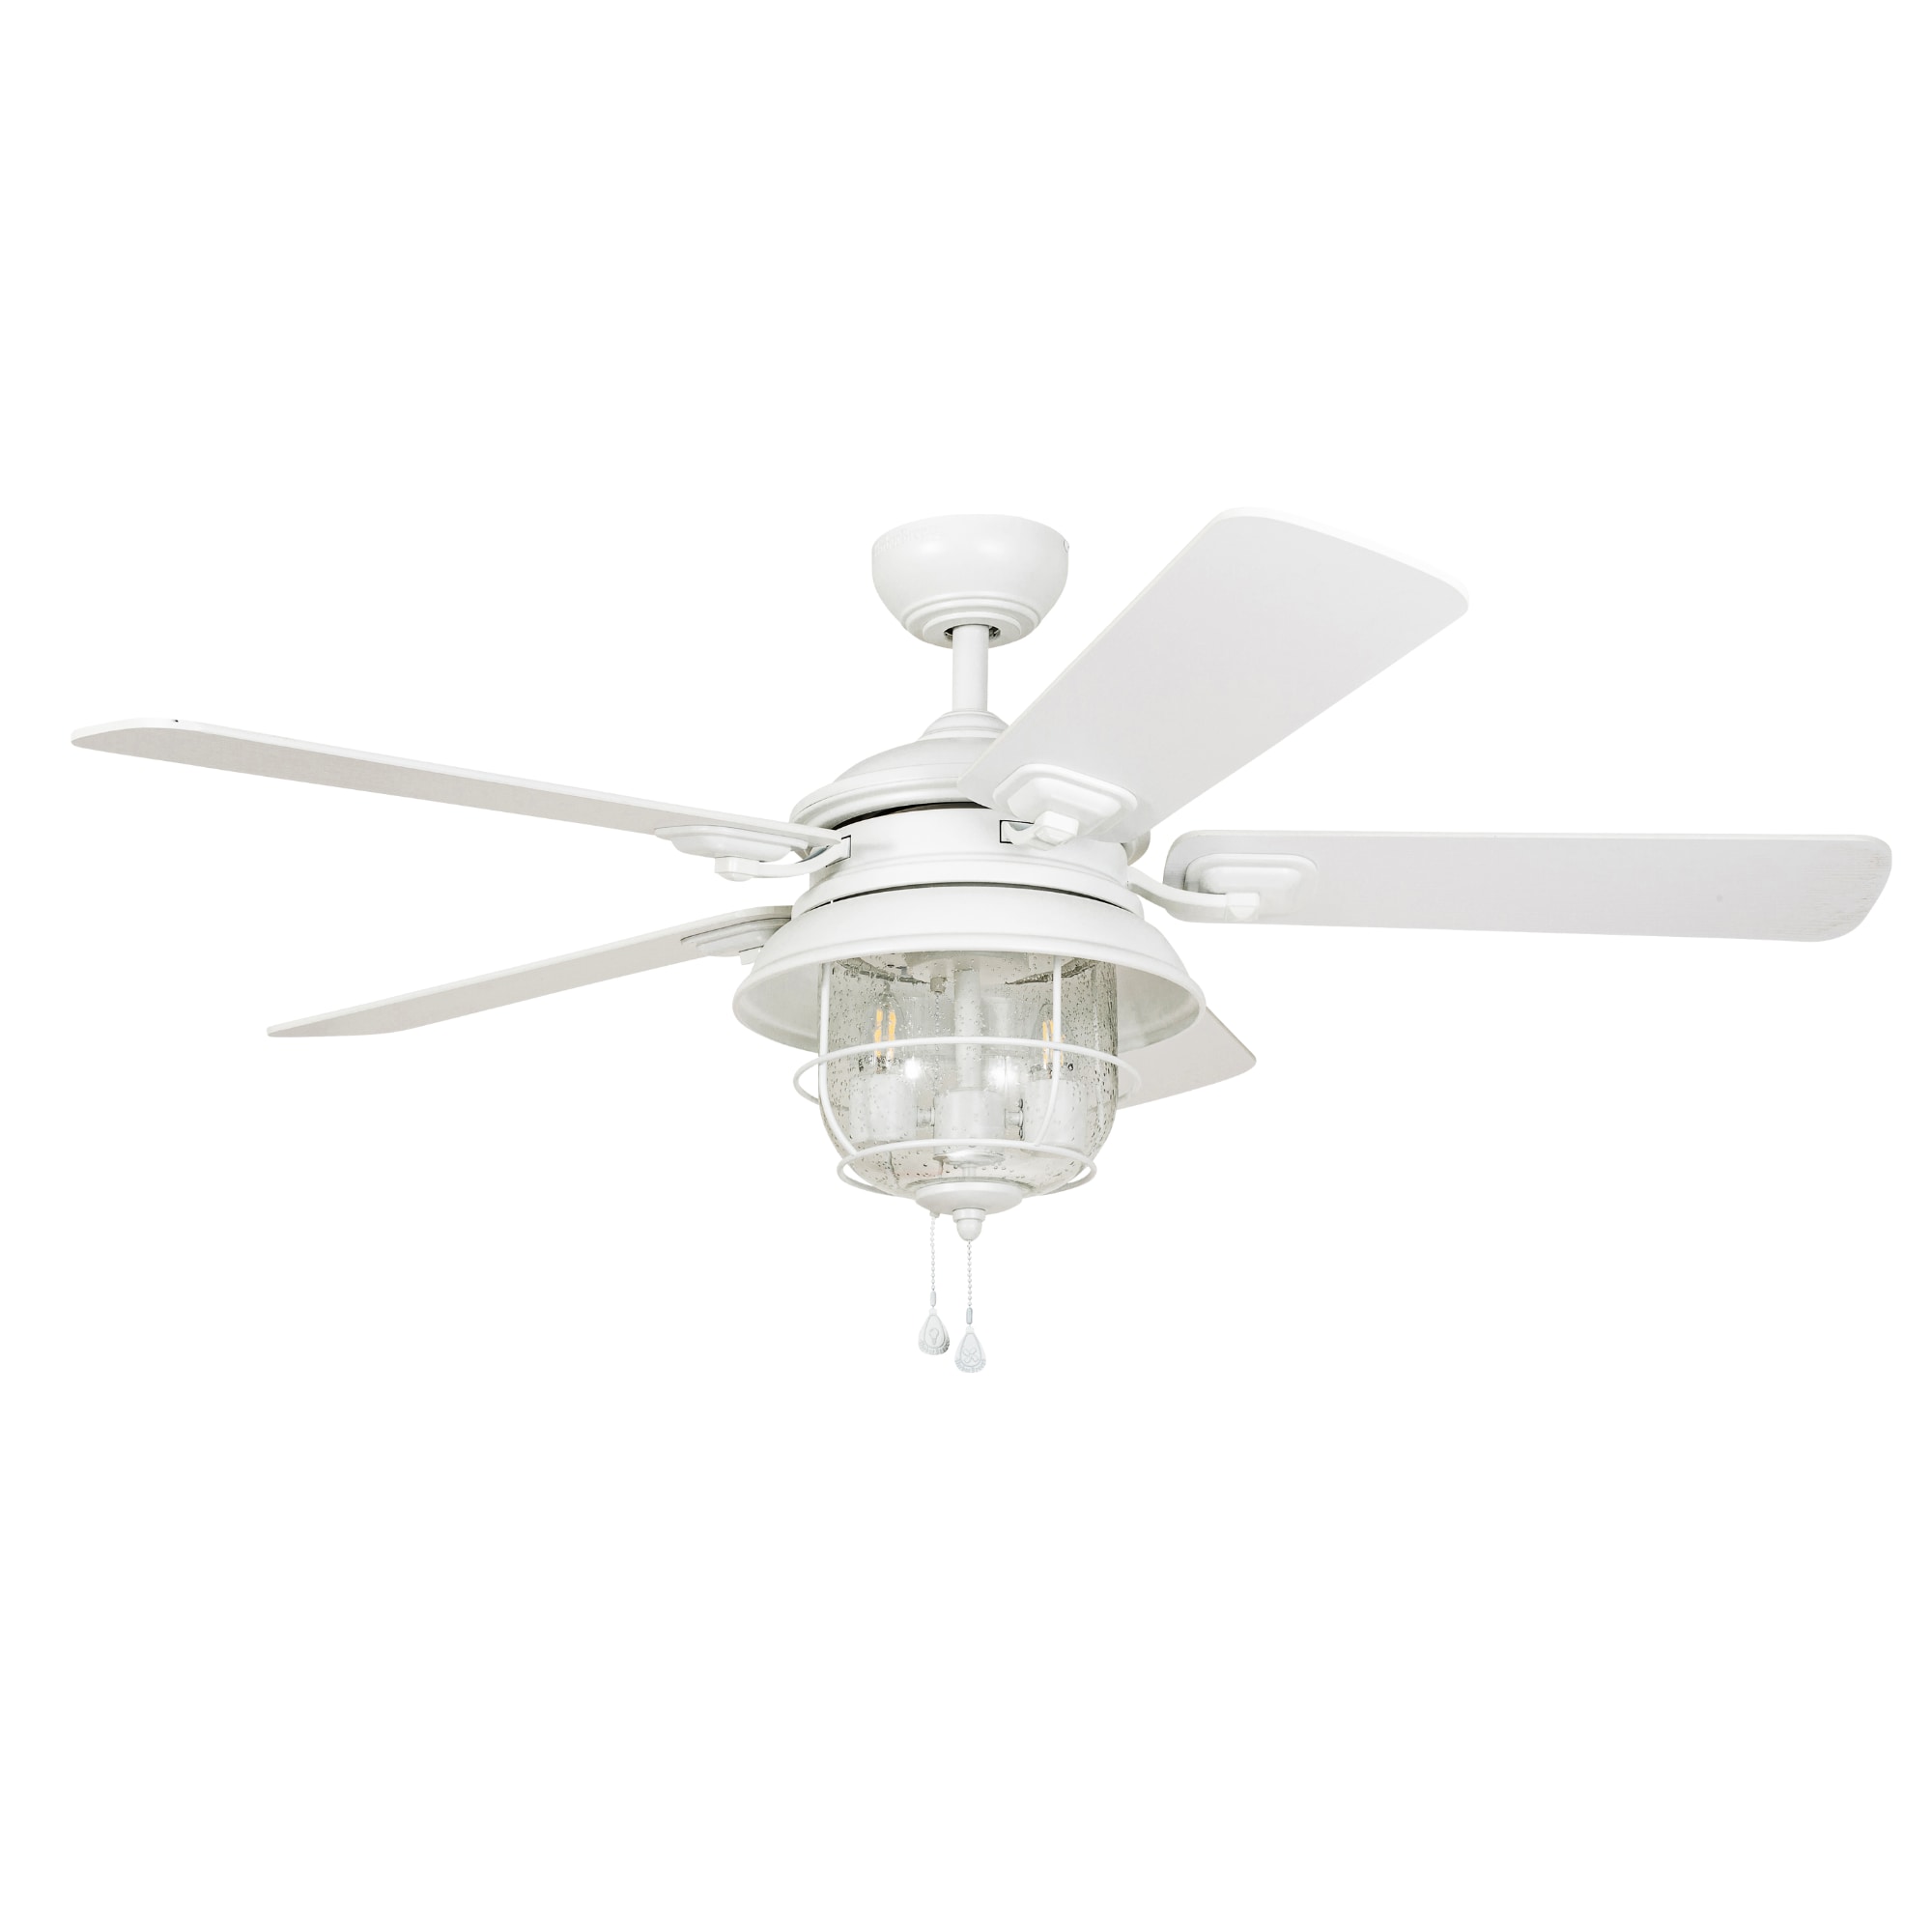 Altissa 52-in White LED Indoor/Outdoor Ceiling Fan with Light (5-Blade) | - Harbor Breeze 42079